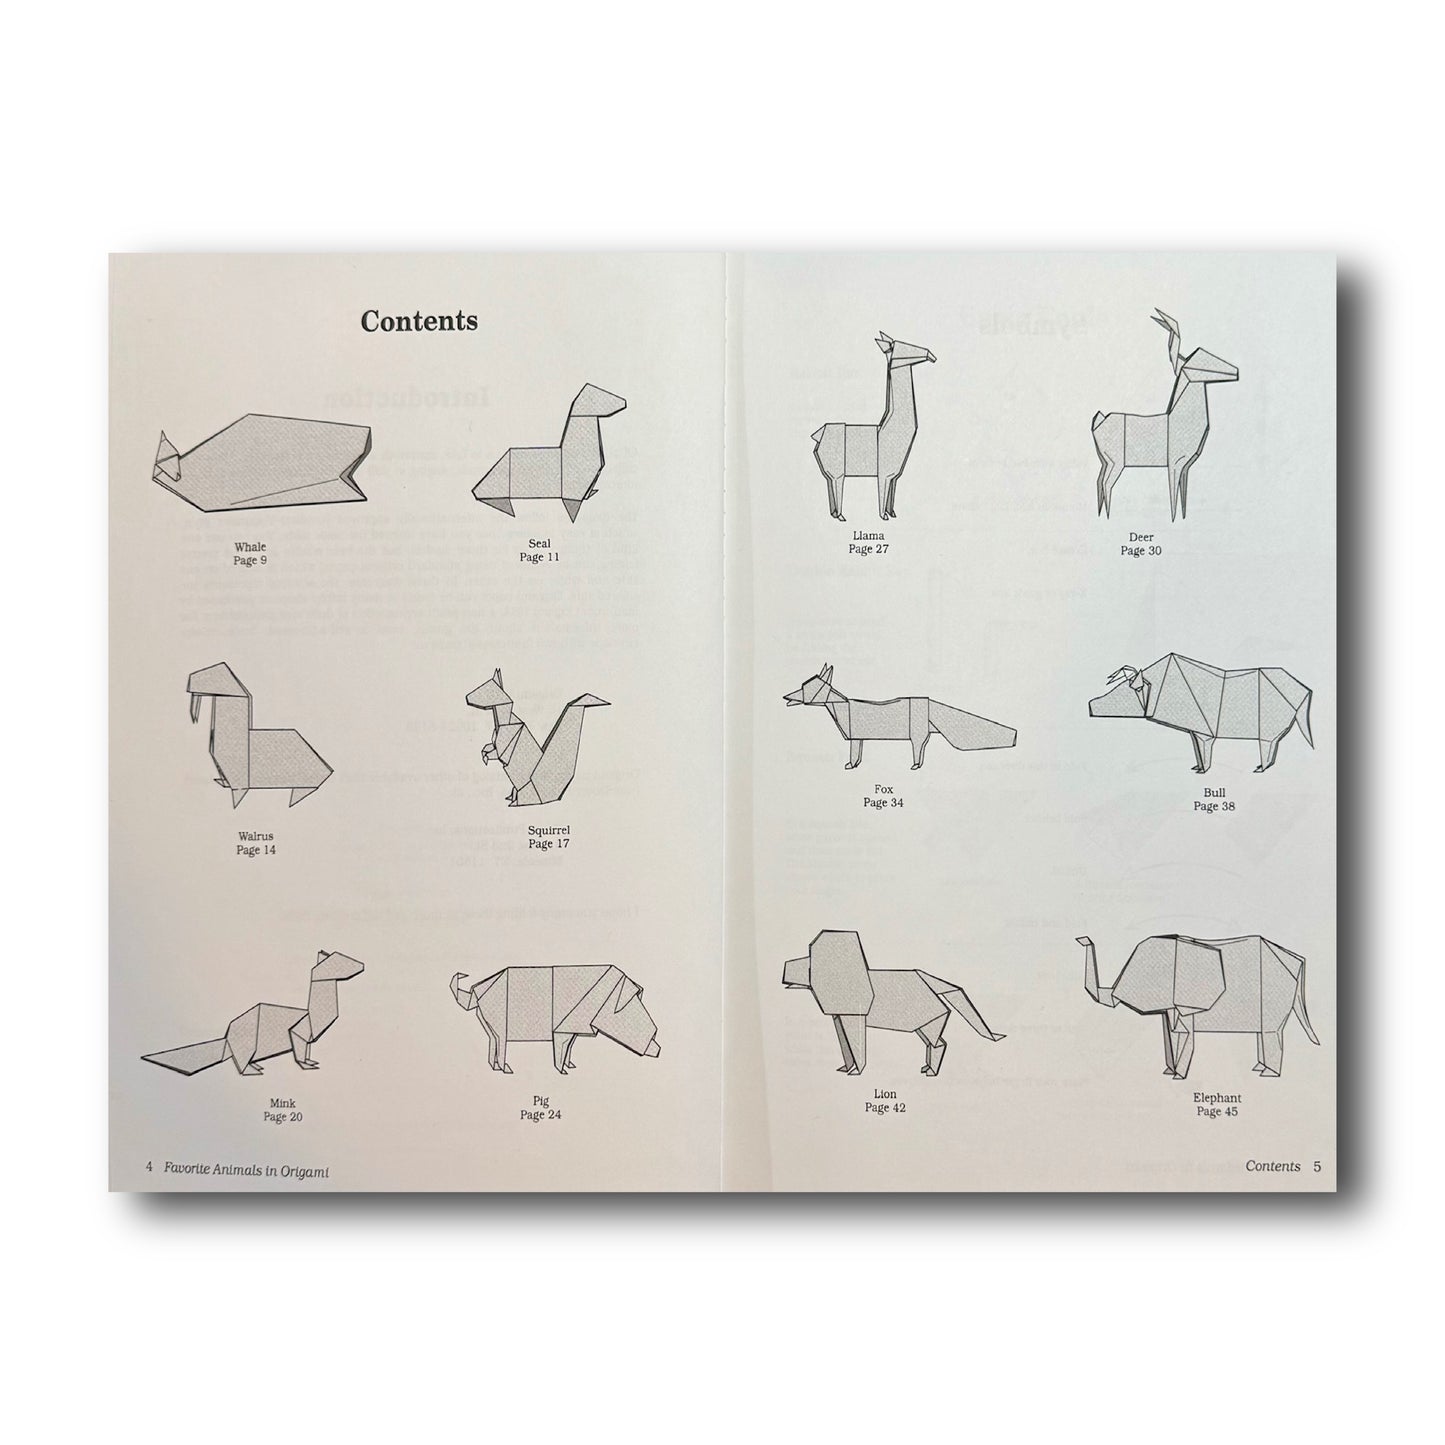 Favorite Animals in Origami: Step-By-Step Instructions for 12 Models